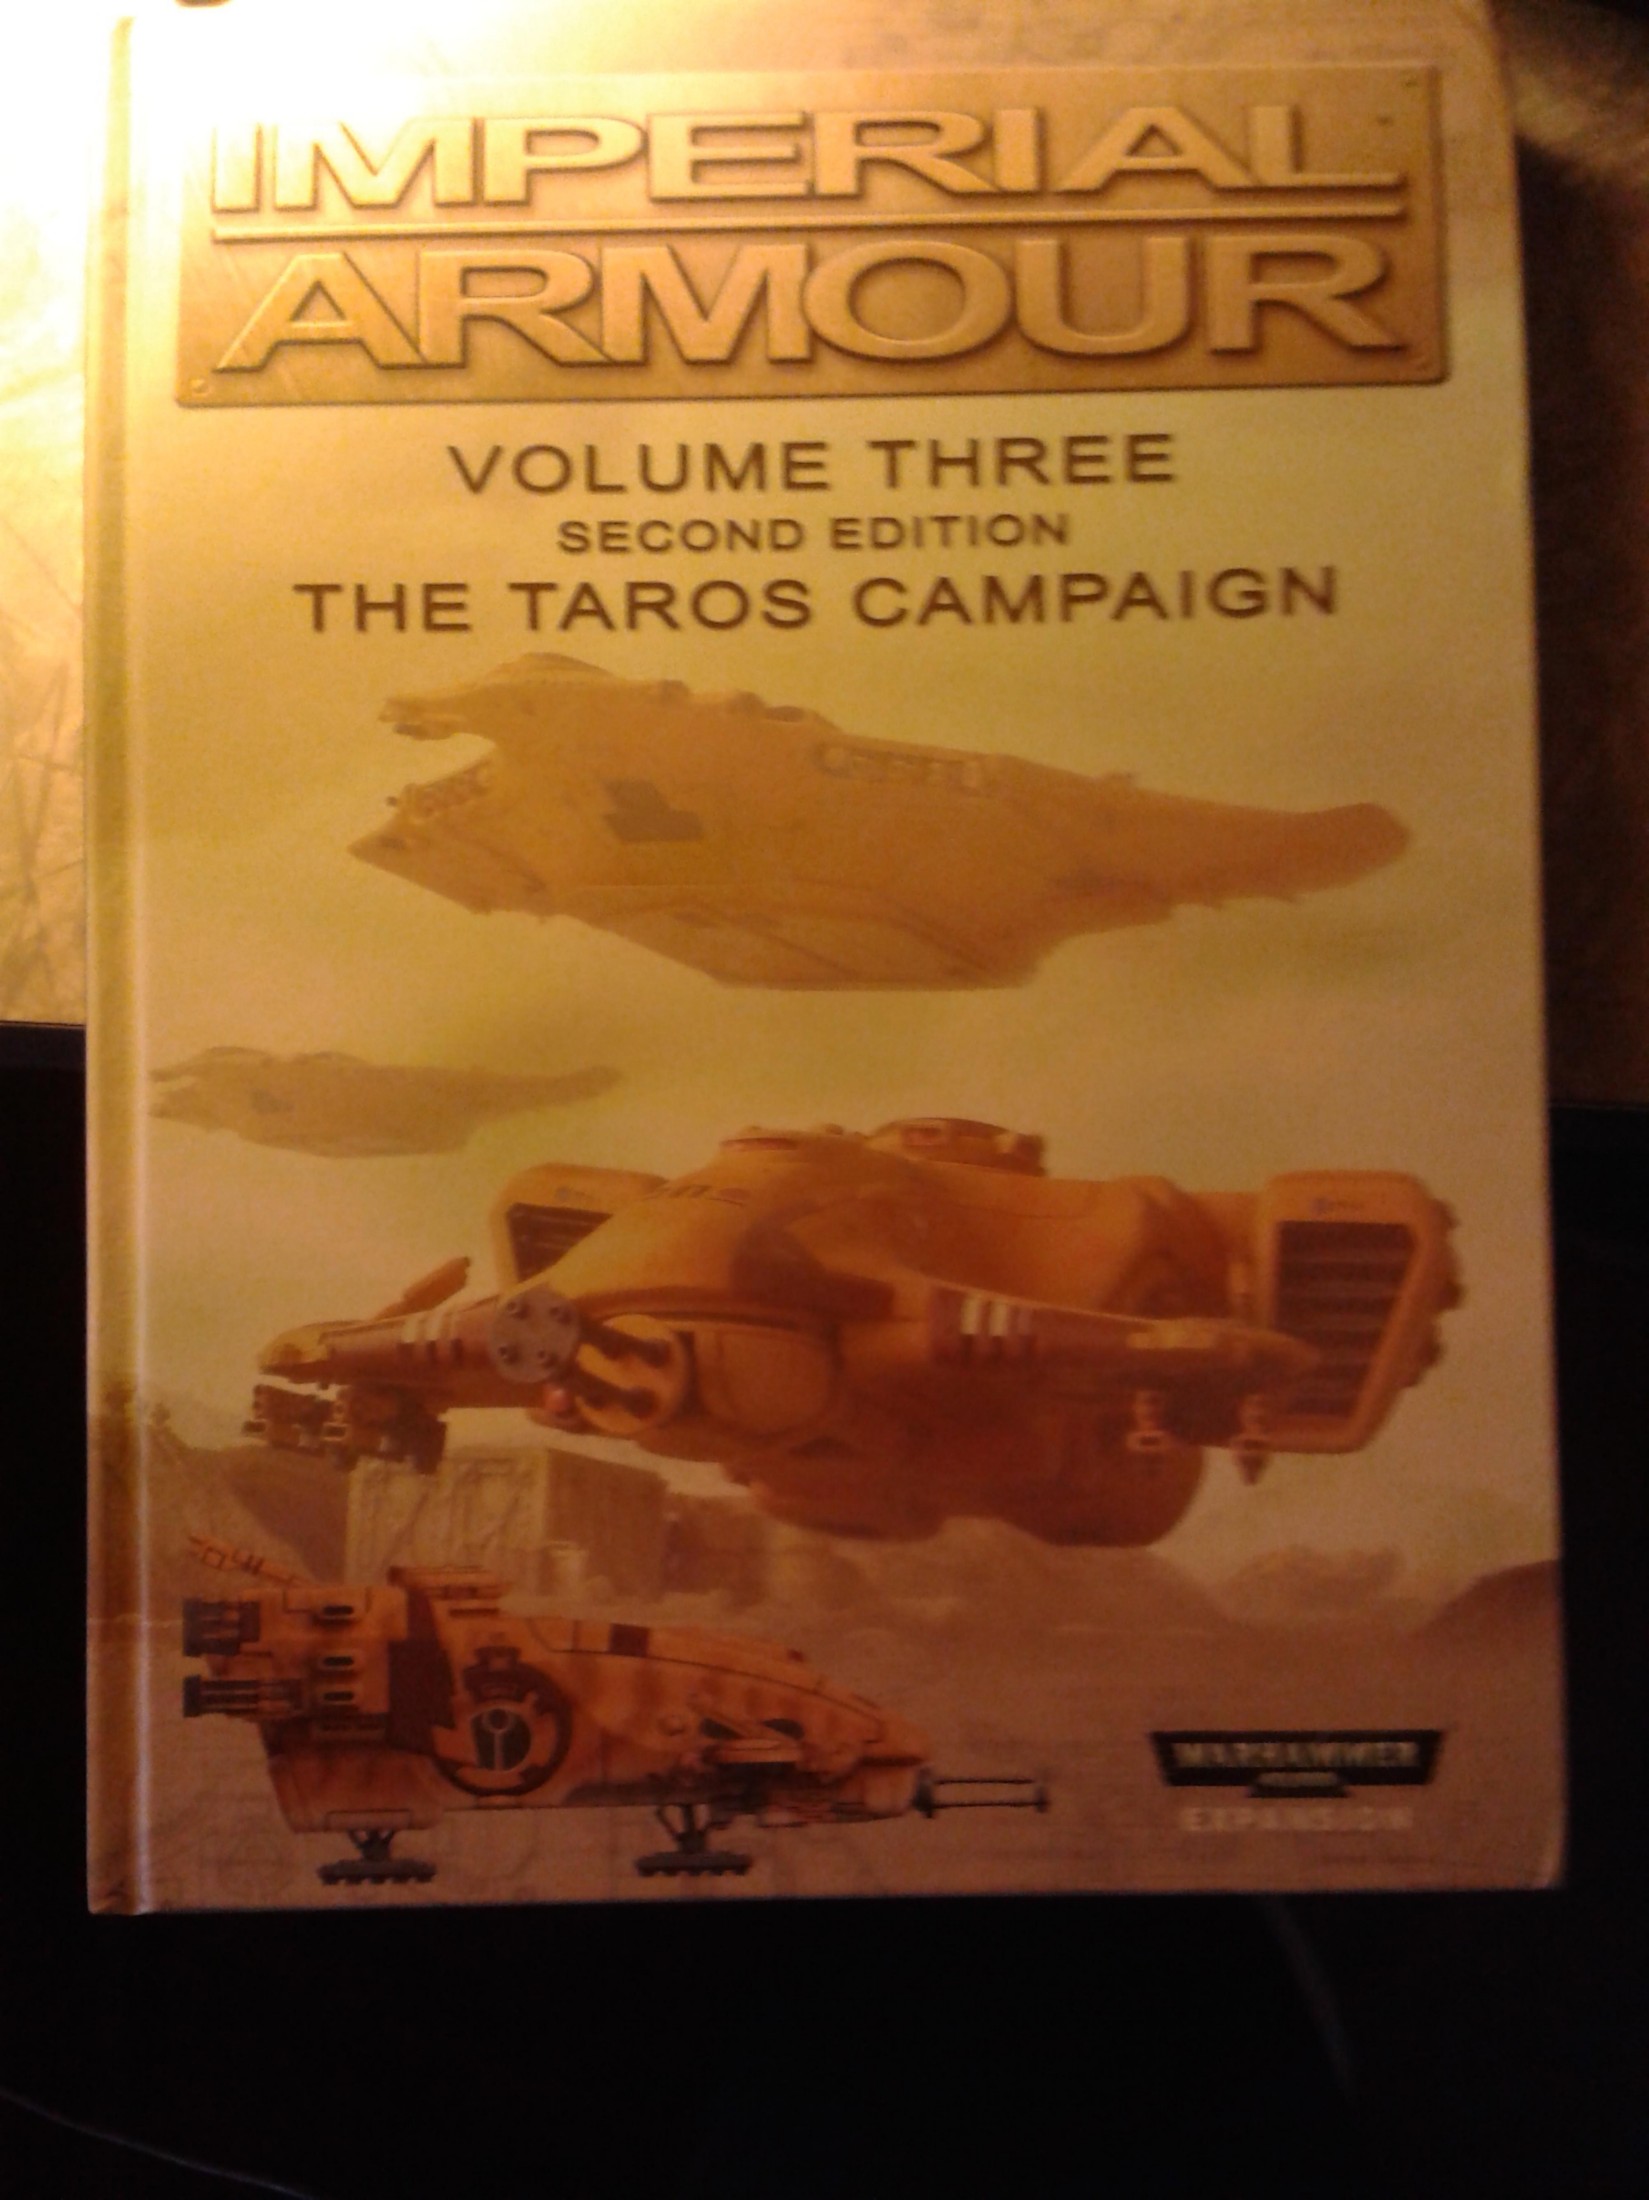 Imperial Armour Volume 03 - 2nd Edition (The Taros Campaign)